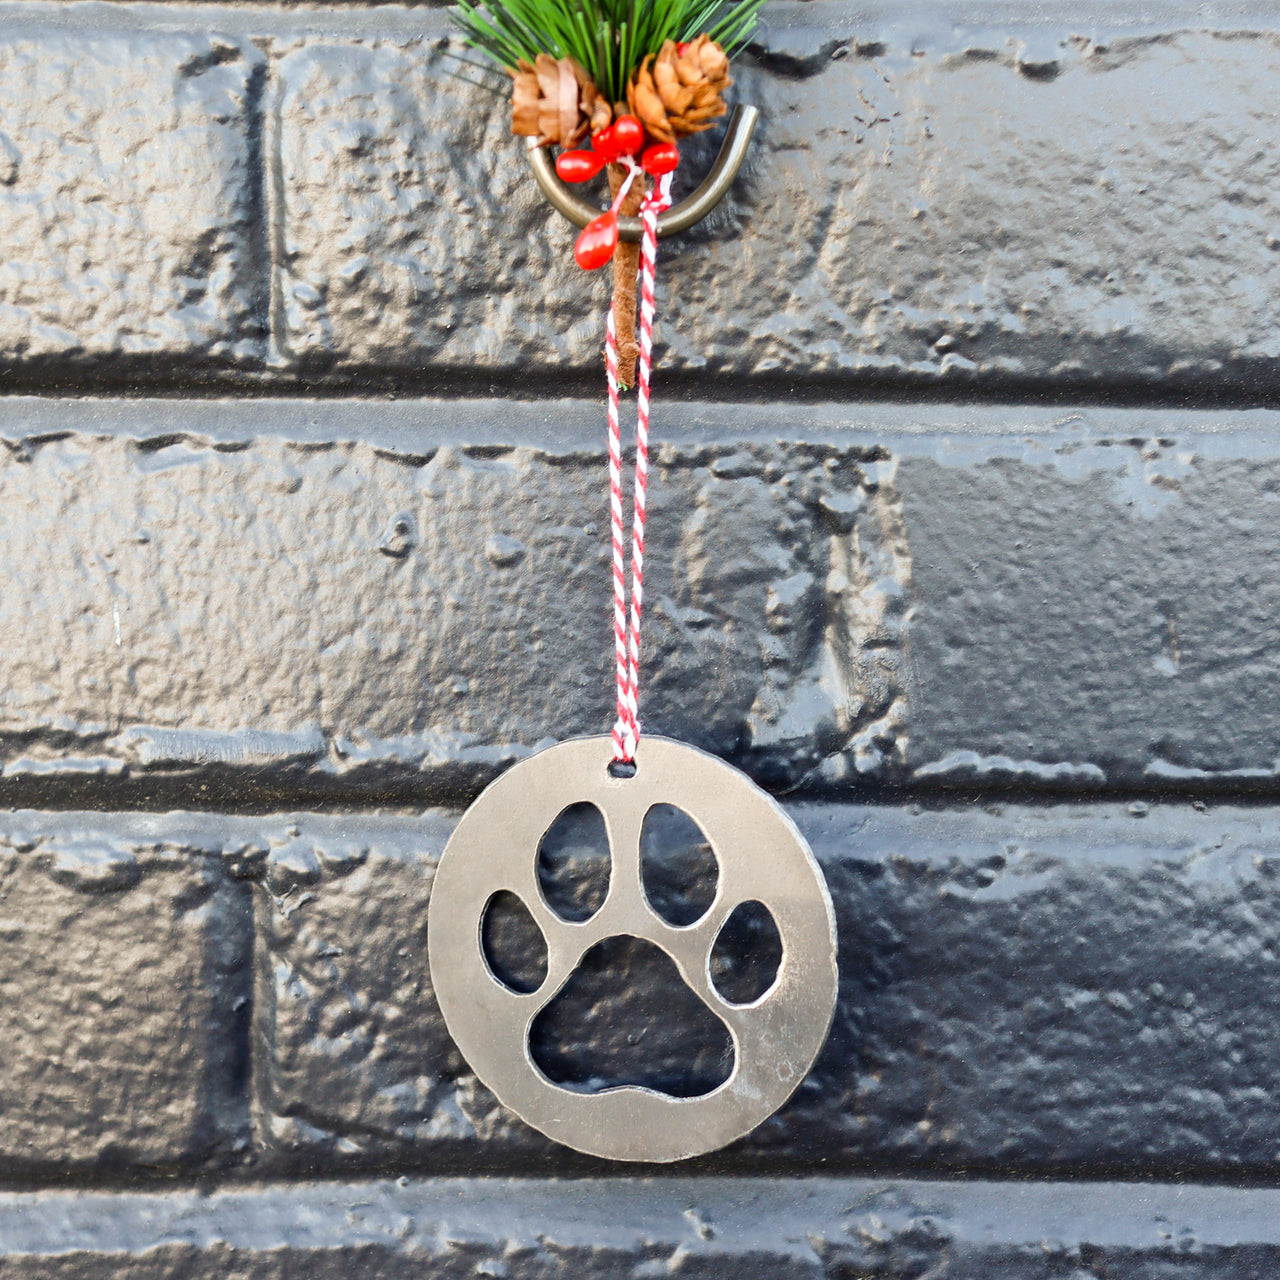 Dog Paw Christmas Ornament - Pet Lover Holiday Stocking Stuffer Gift - Tree Home Decor